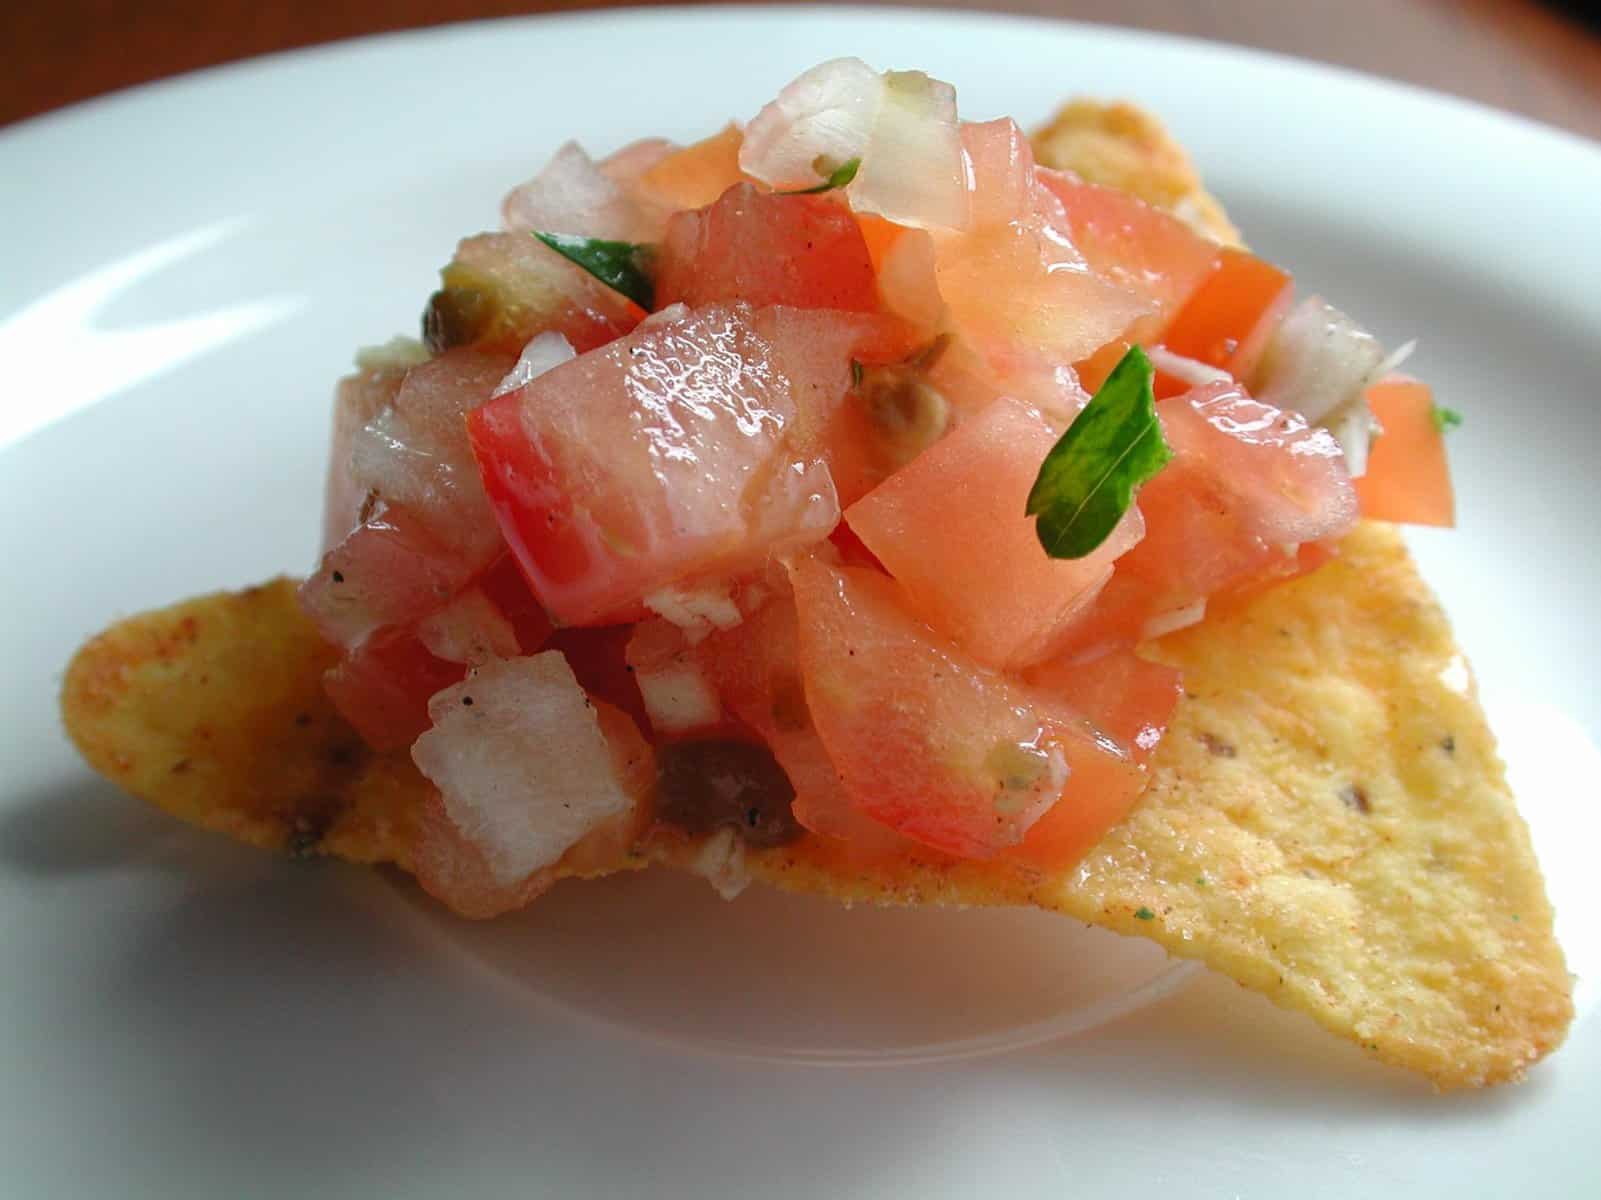  This pico de gallo is the perfect topping for any dish.